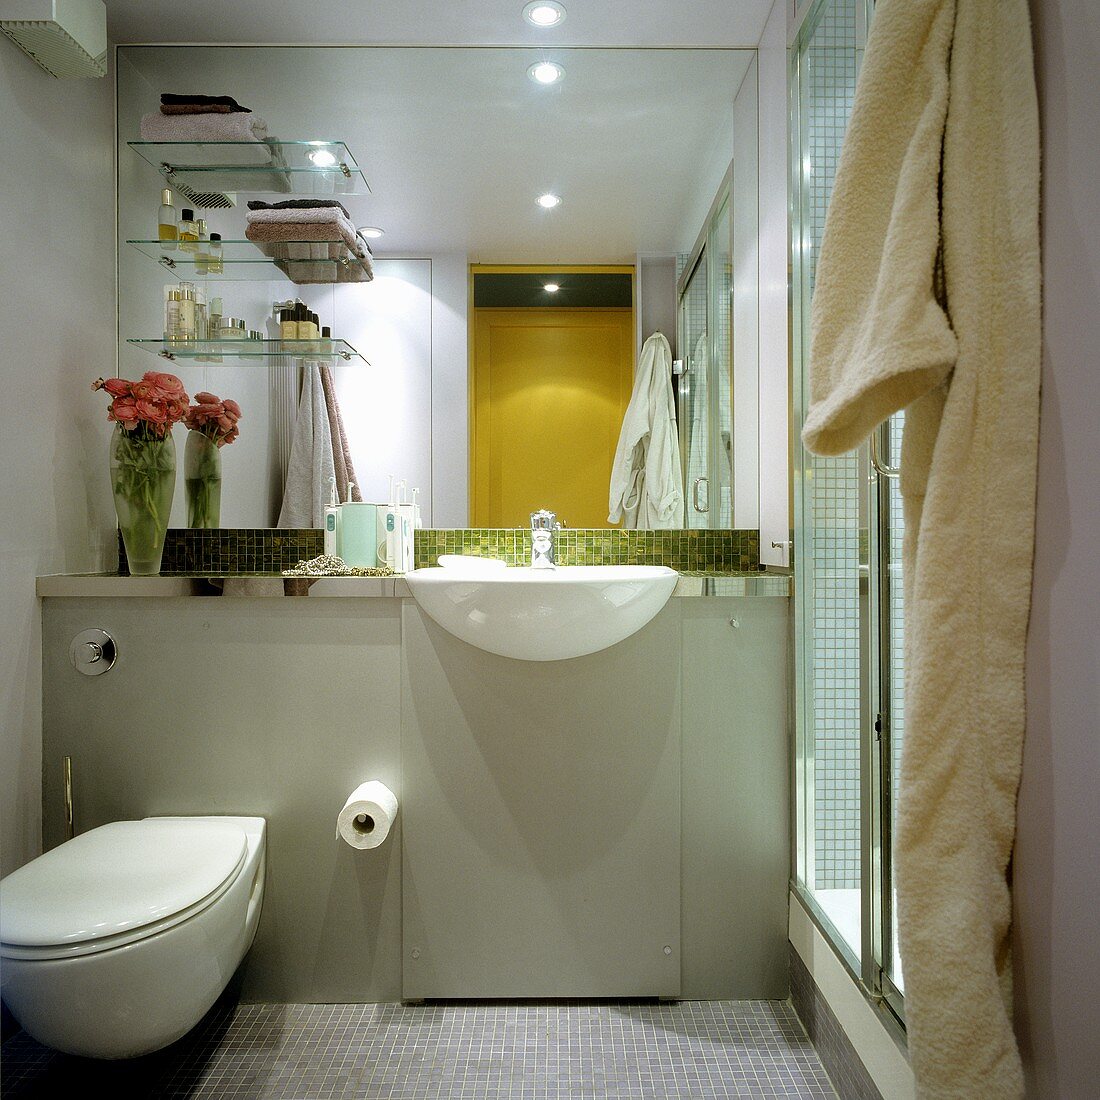 A bathroom with a toilet and a wash basin against a mirrored wall